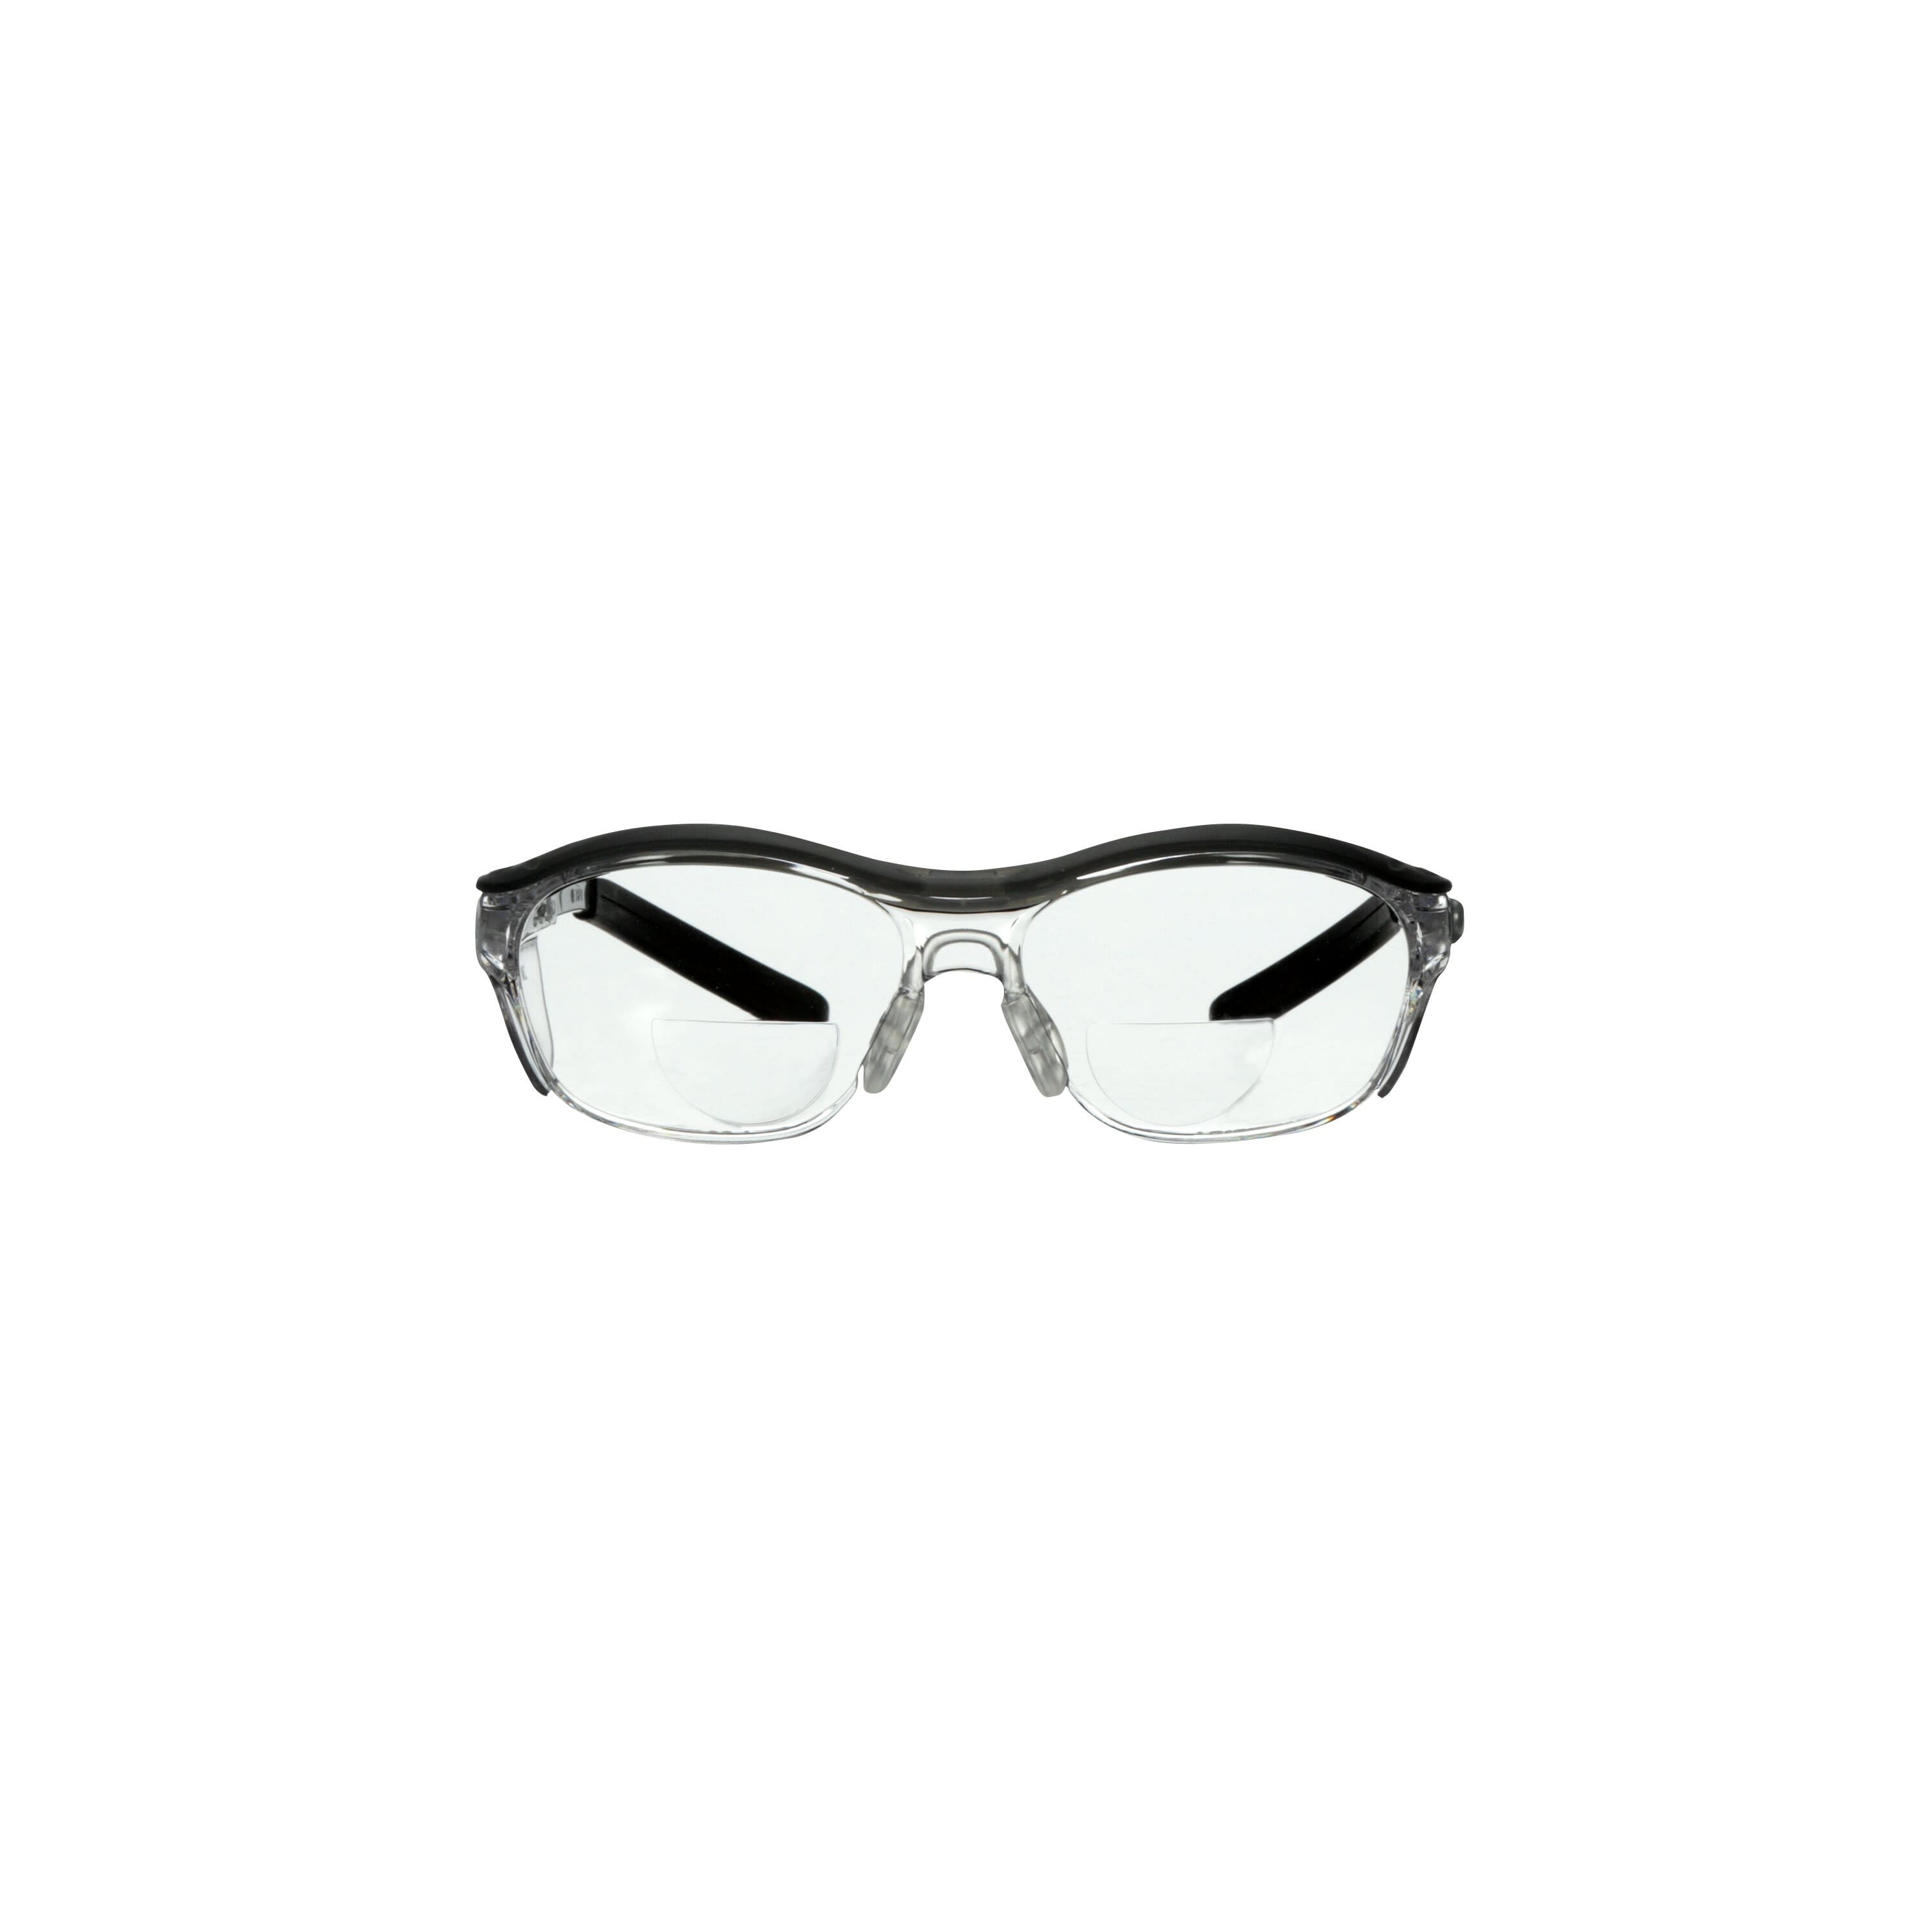 Universal 2 Pack of Red Enhancement Safety Glasses 